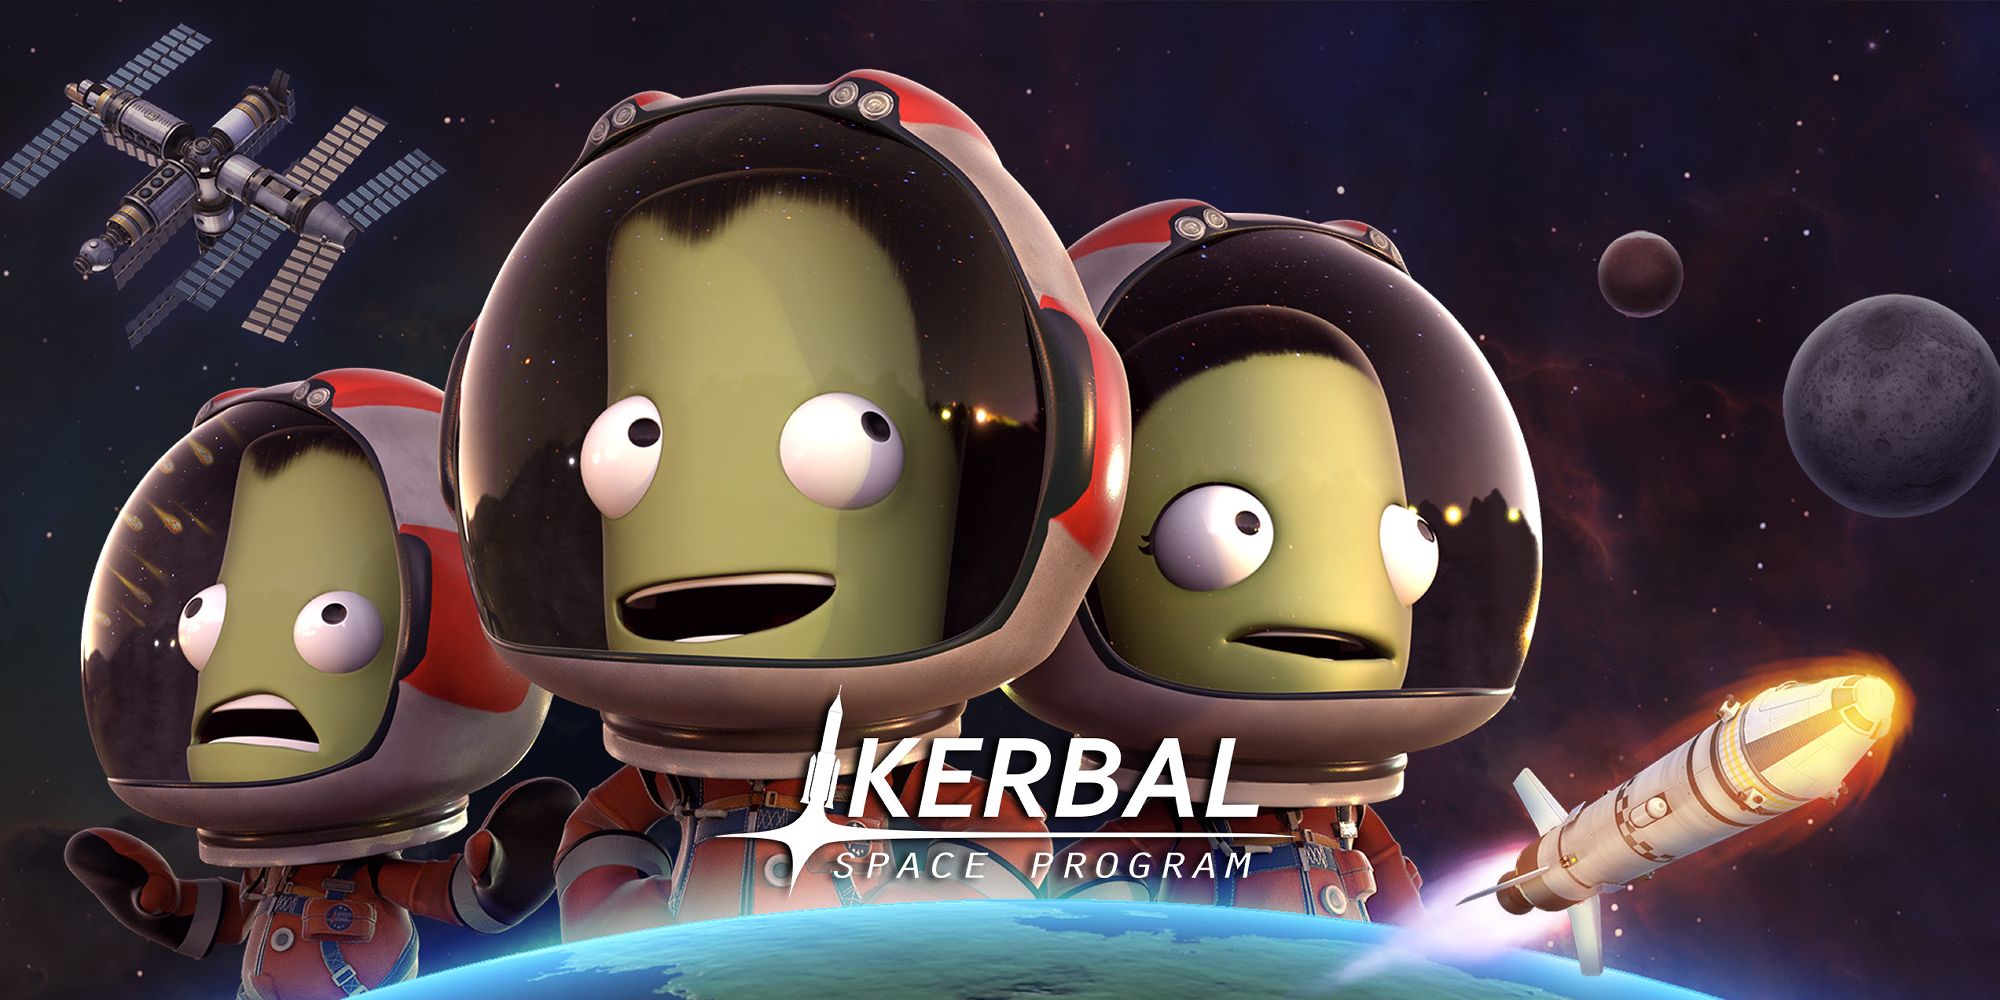 Kerbals In Space Look Out In Wonder With Equipment Floating 